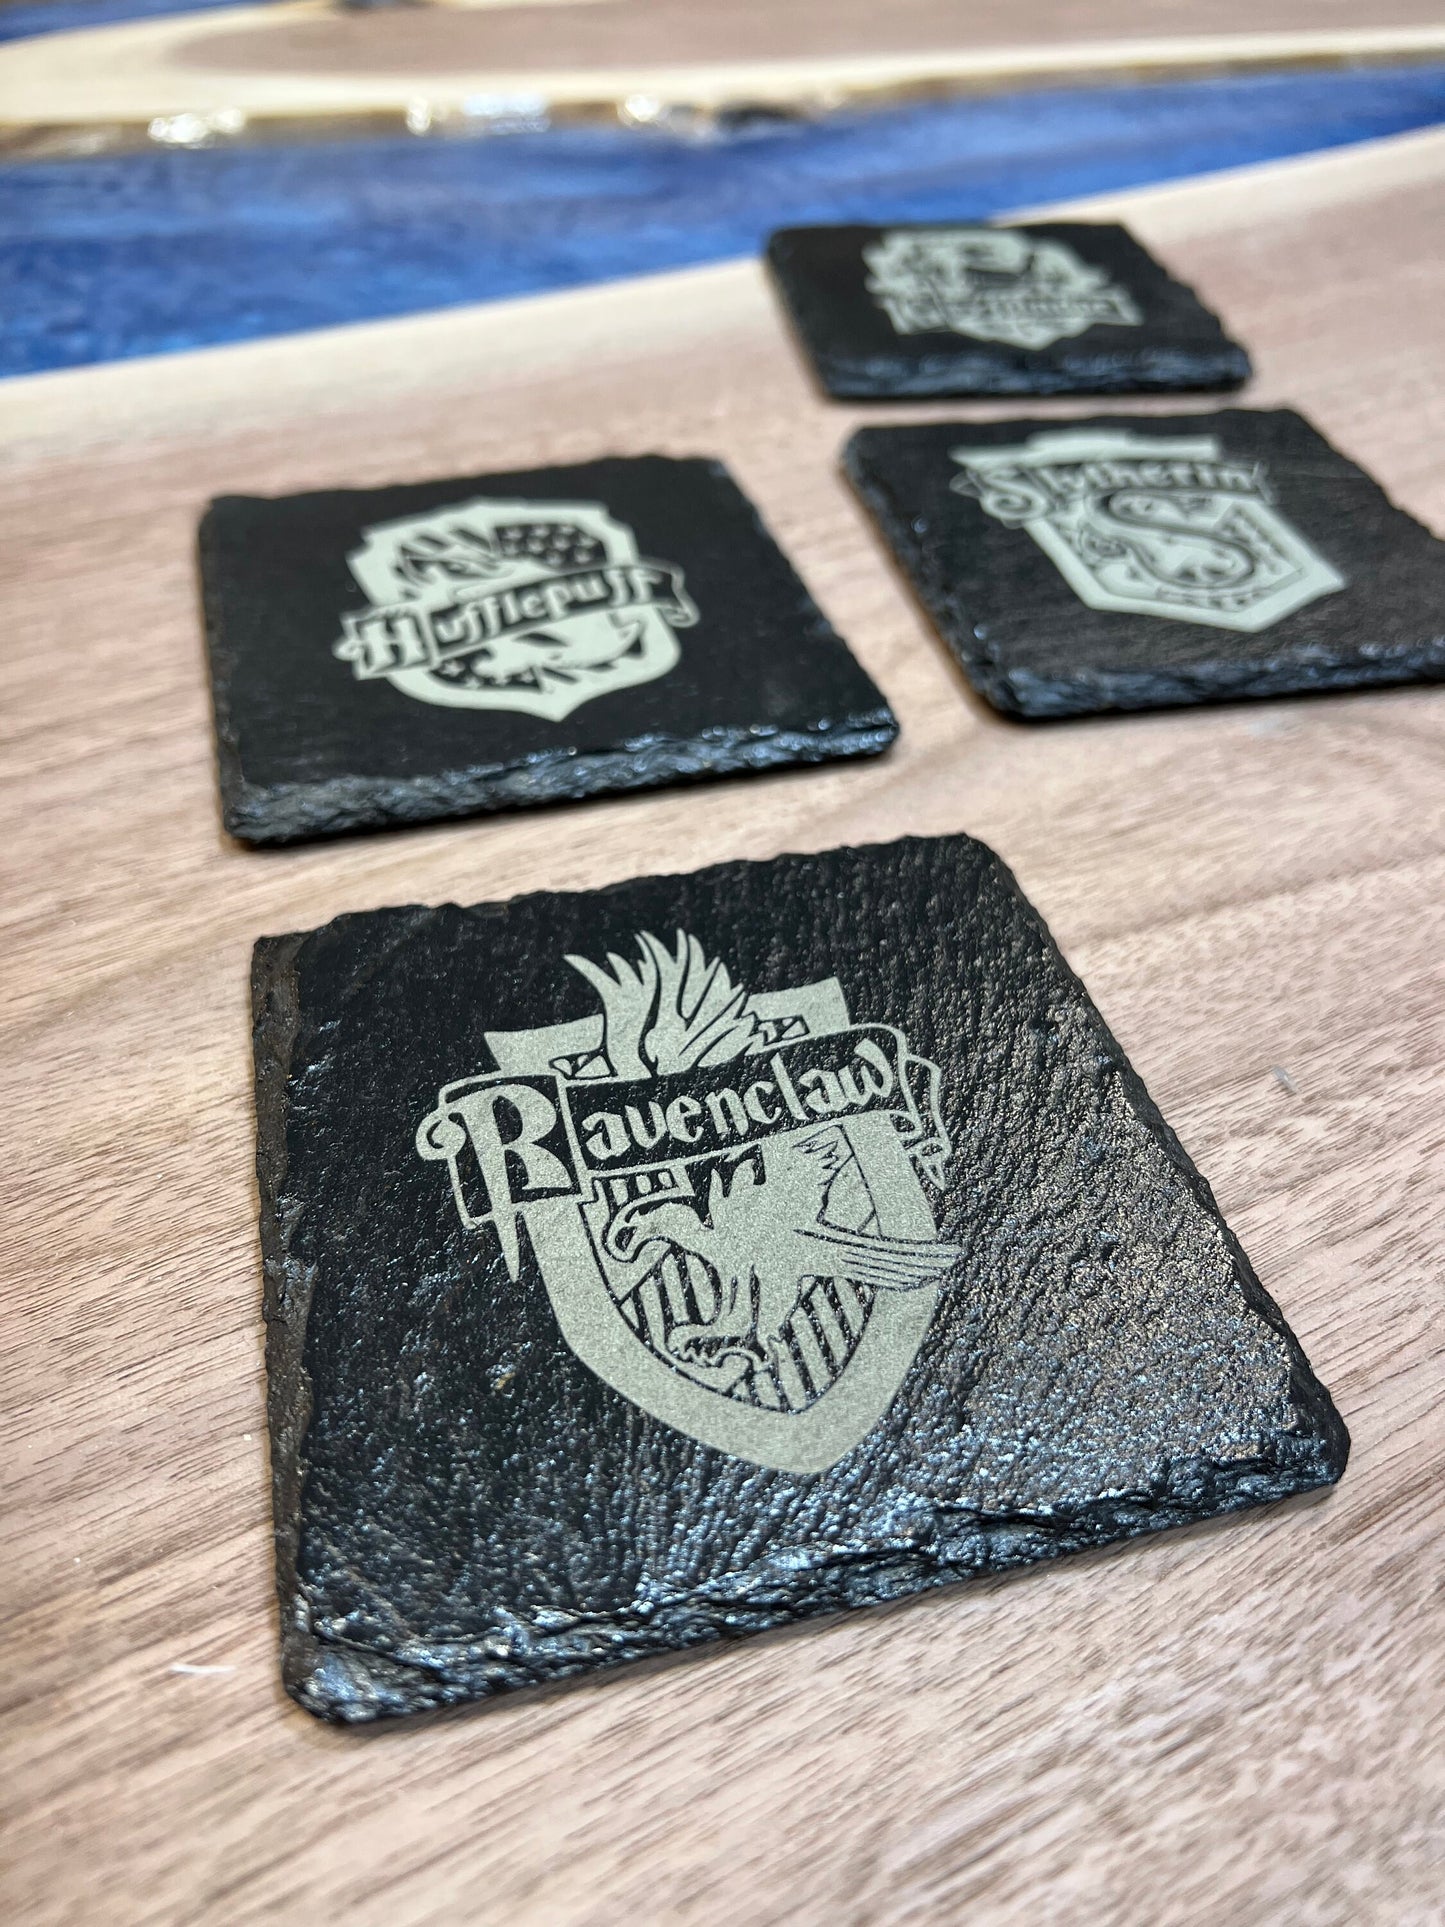 Hogwarts houses Coat of Arms coasters